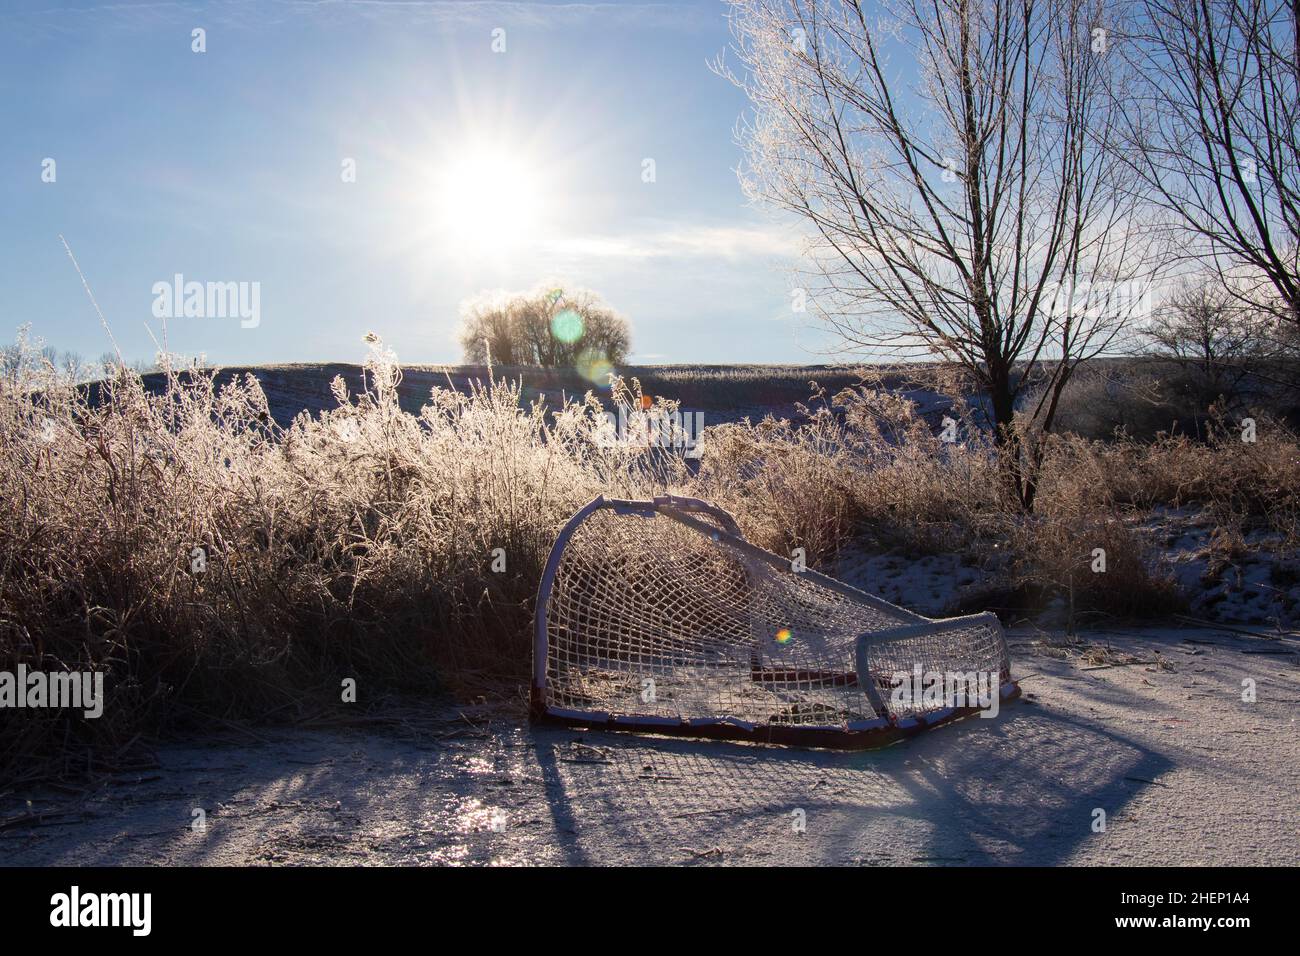 A hockey net is laid rested on a frozen pond as the morning sun shines down on a frozen landscape. Stock Photo